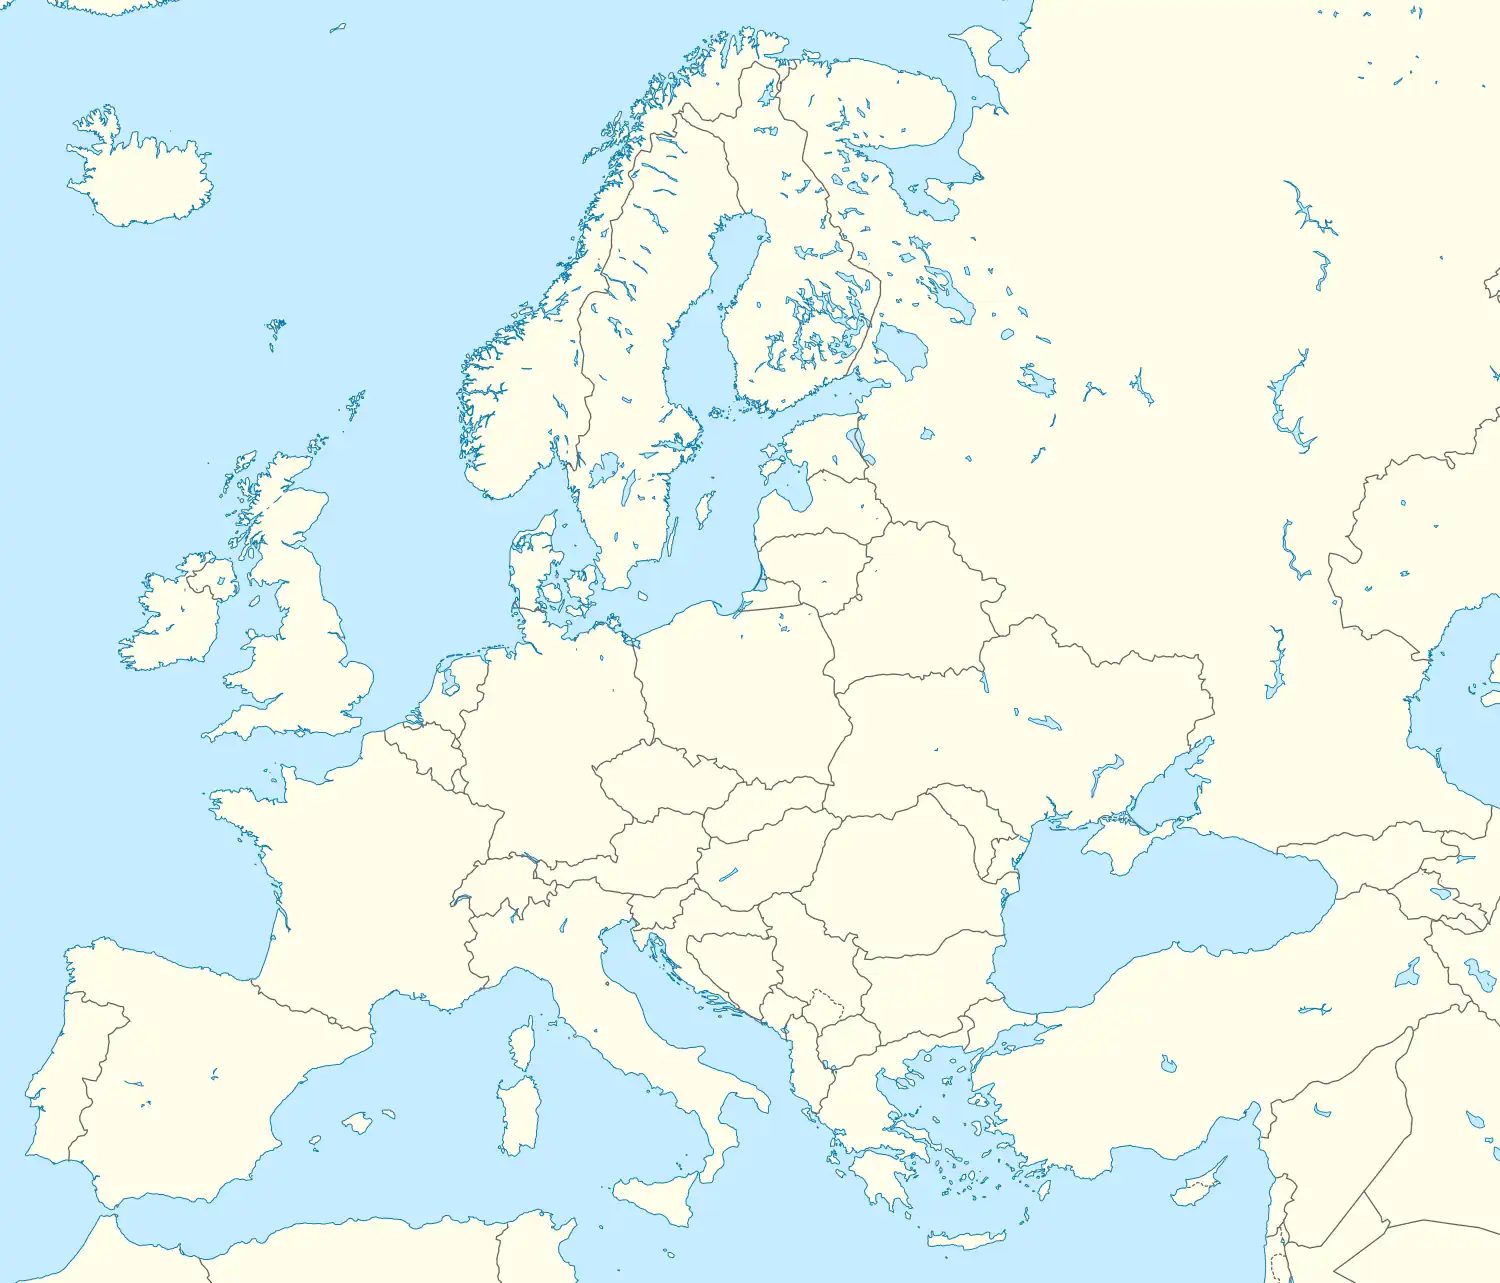 LUBA is located in Europe